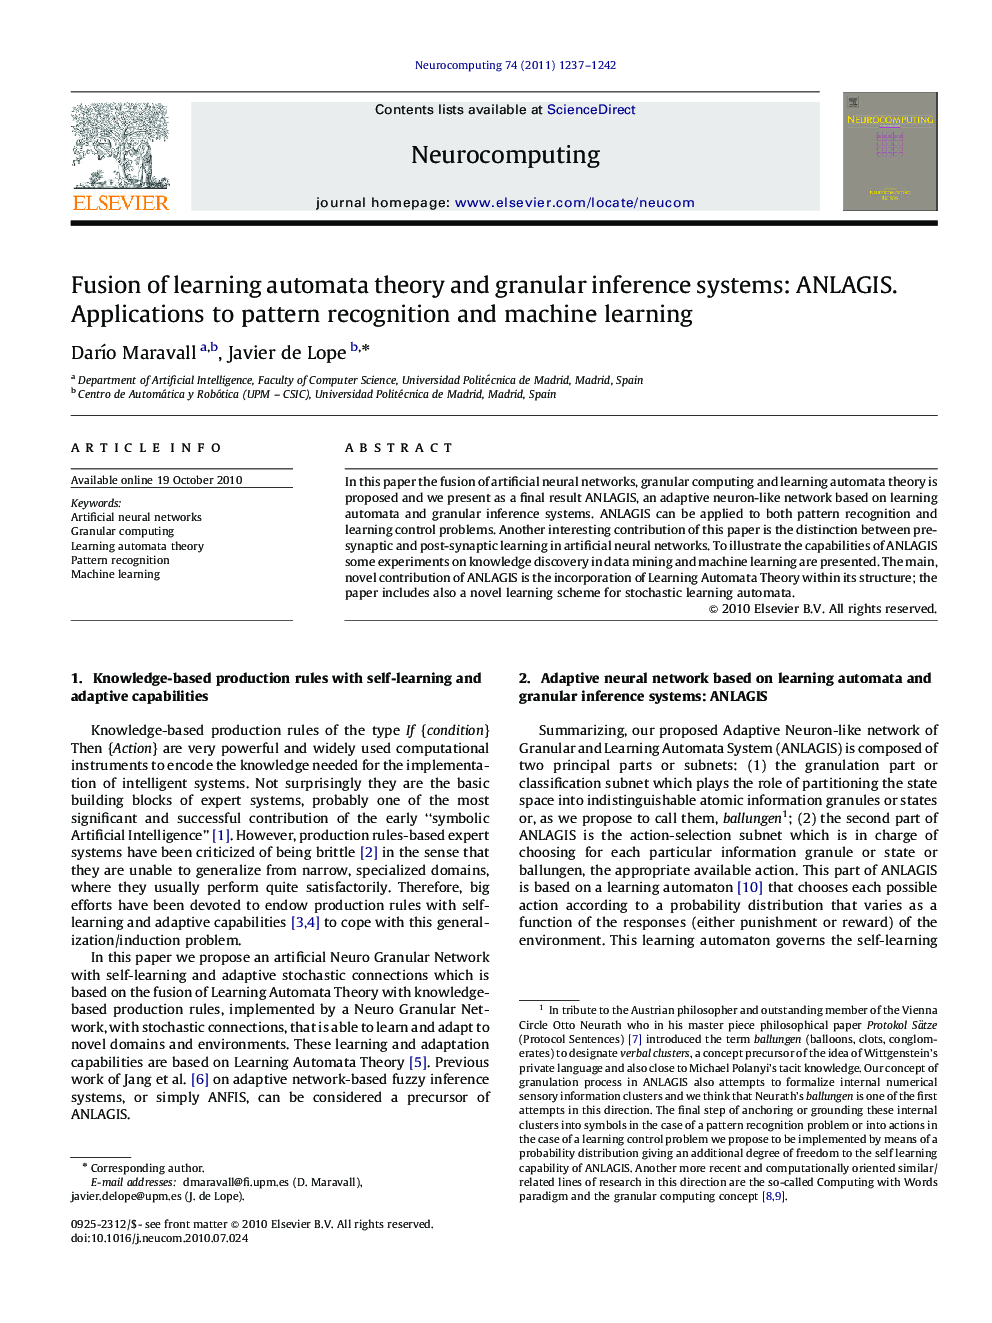 Fusion of learning automata theory and granular inference systems: ANLAGIS. Applications to pattern recognition and machine learning